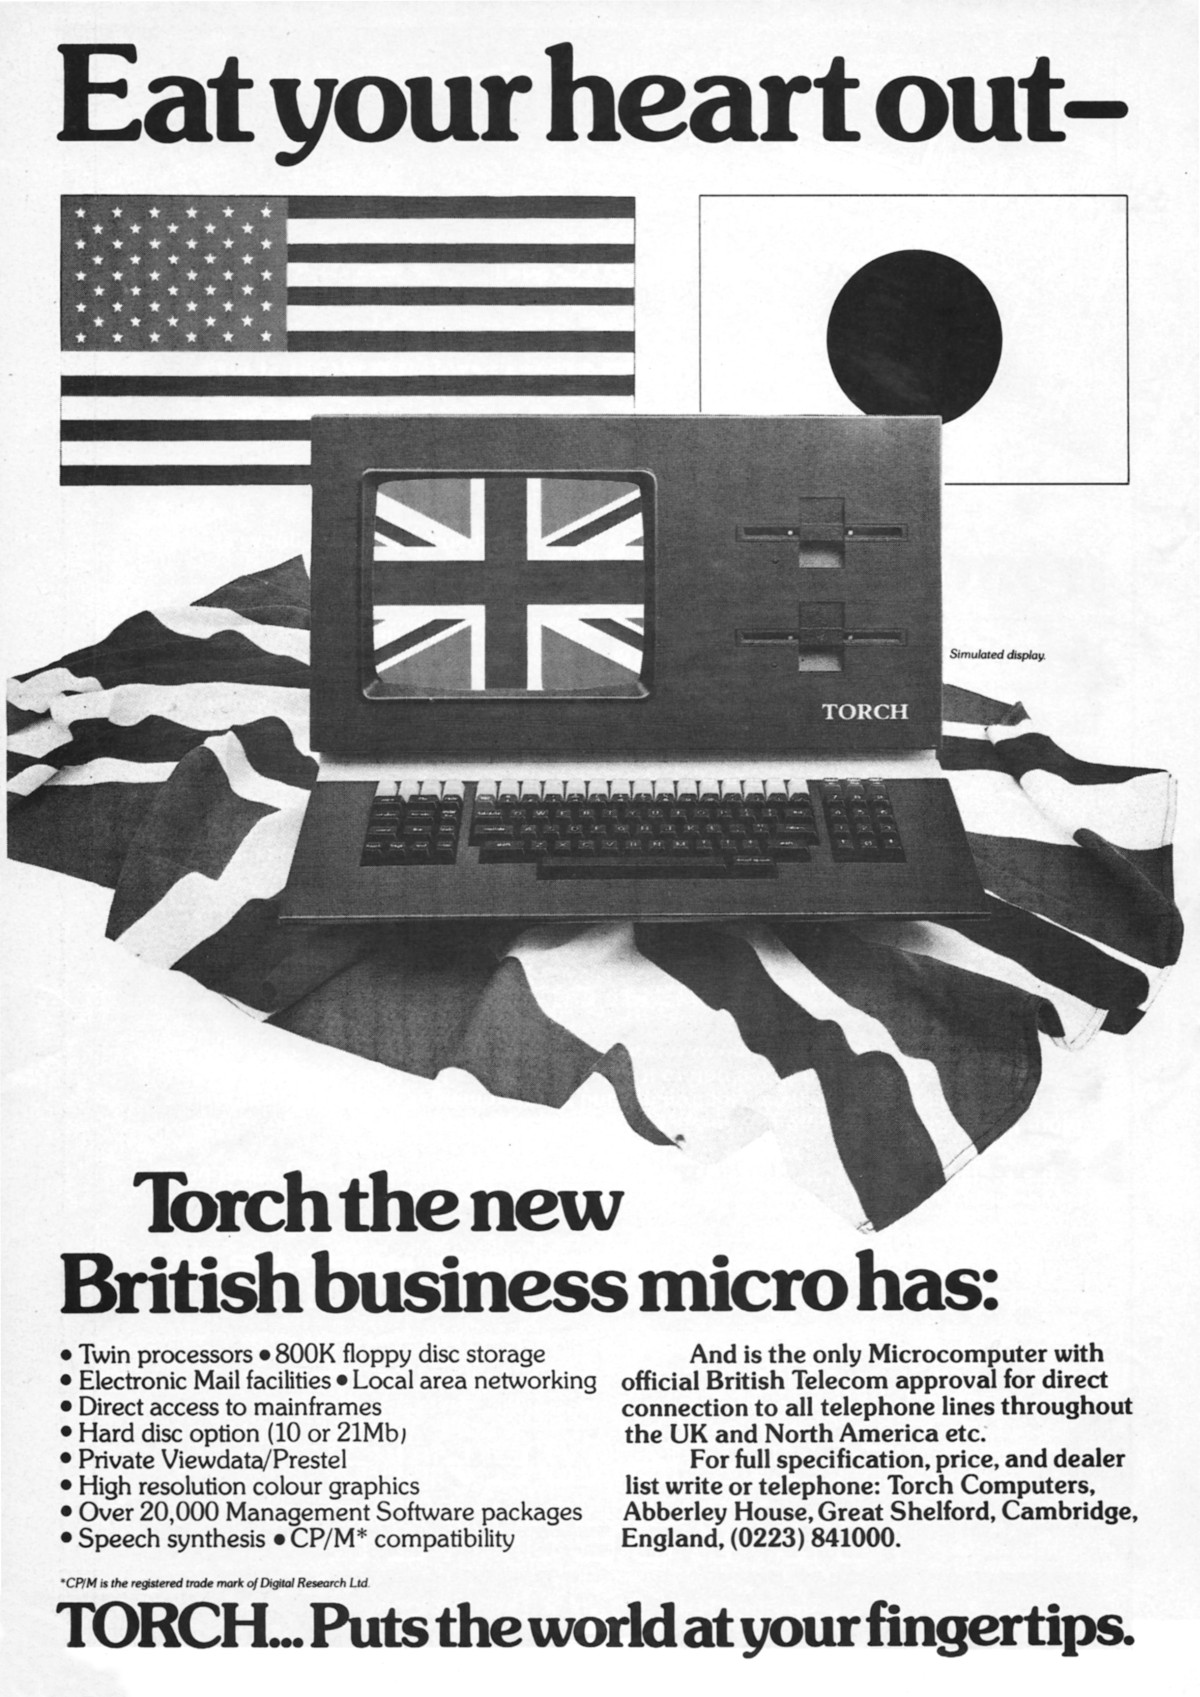 Torch takes aim at the Americans and Japanese in another early advert for what would become the Communicator. From Personal Computer World, December 1982